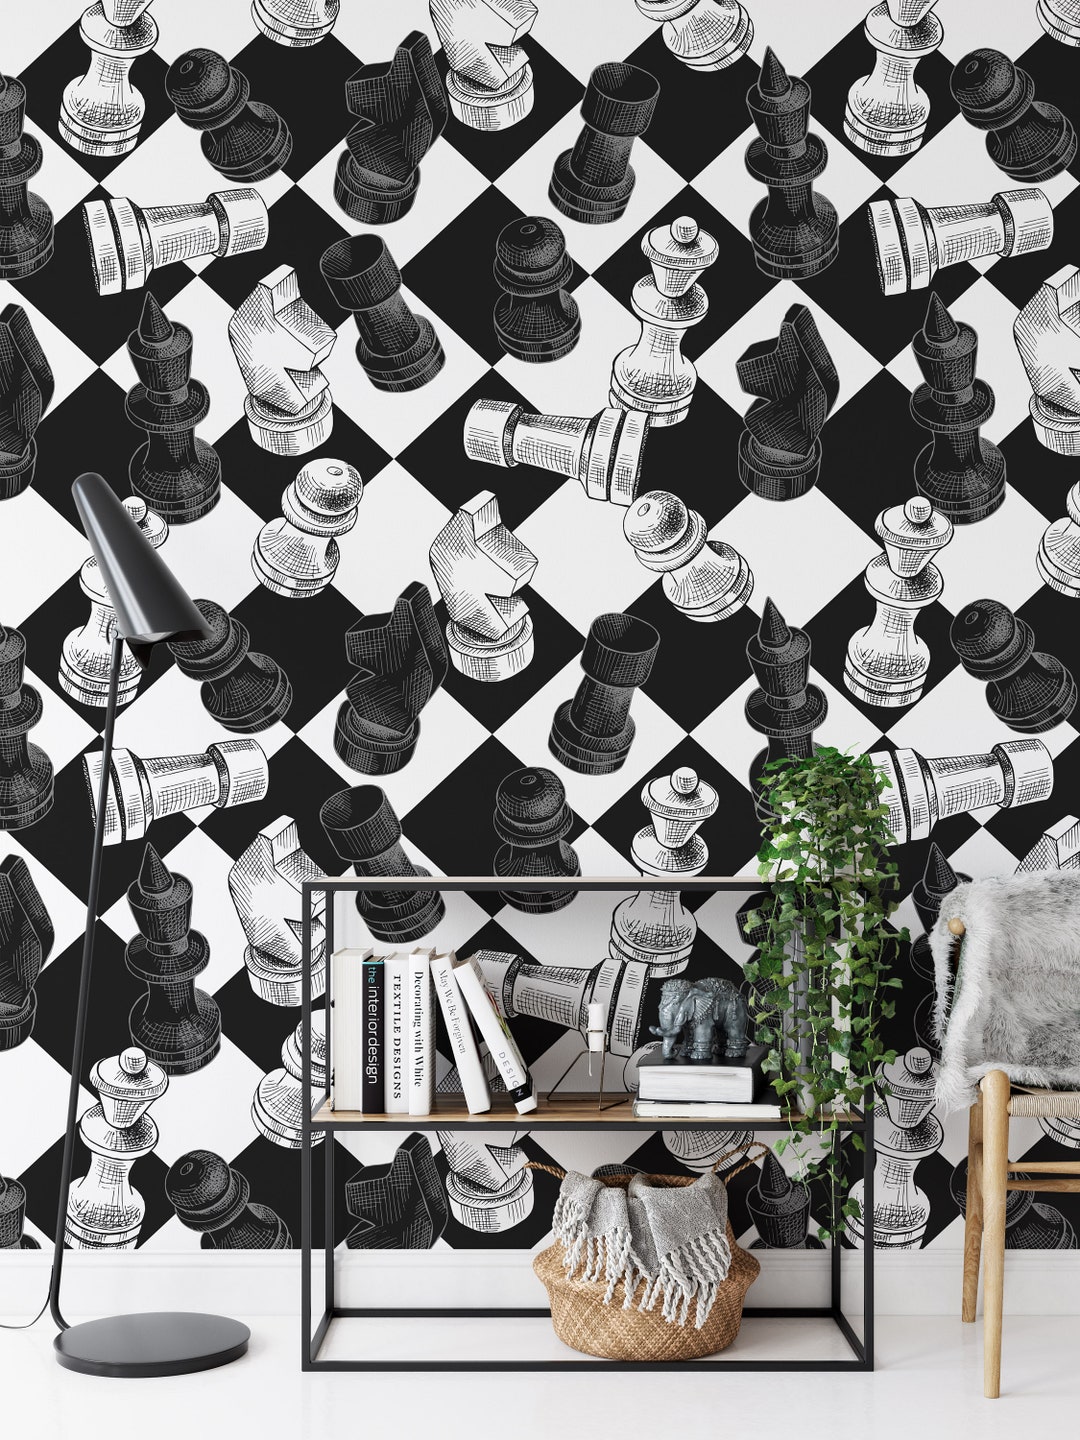 Chess Pieces Chessboard Wallpaper Black and White Antique - Etsy